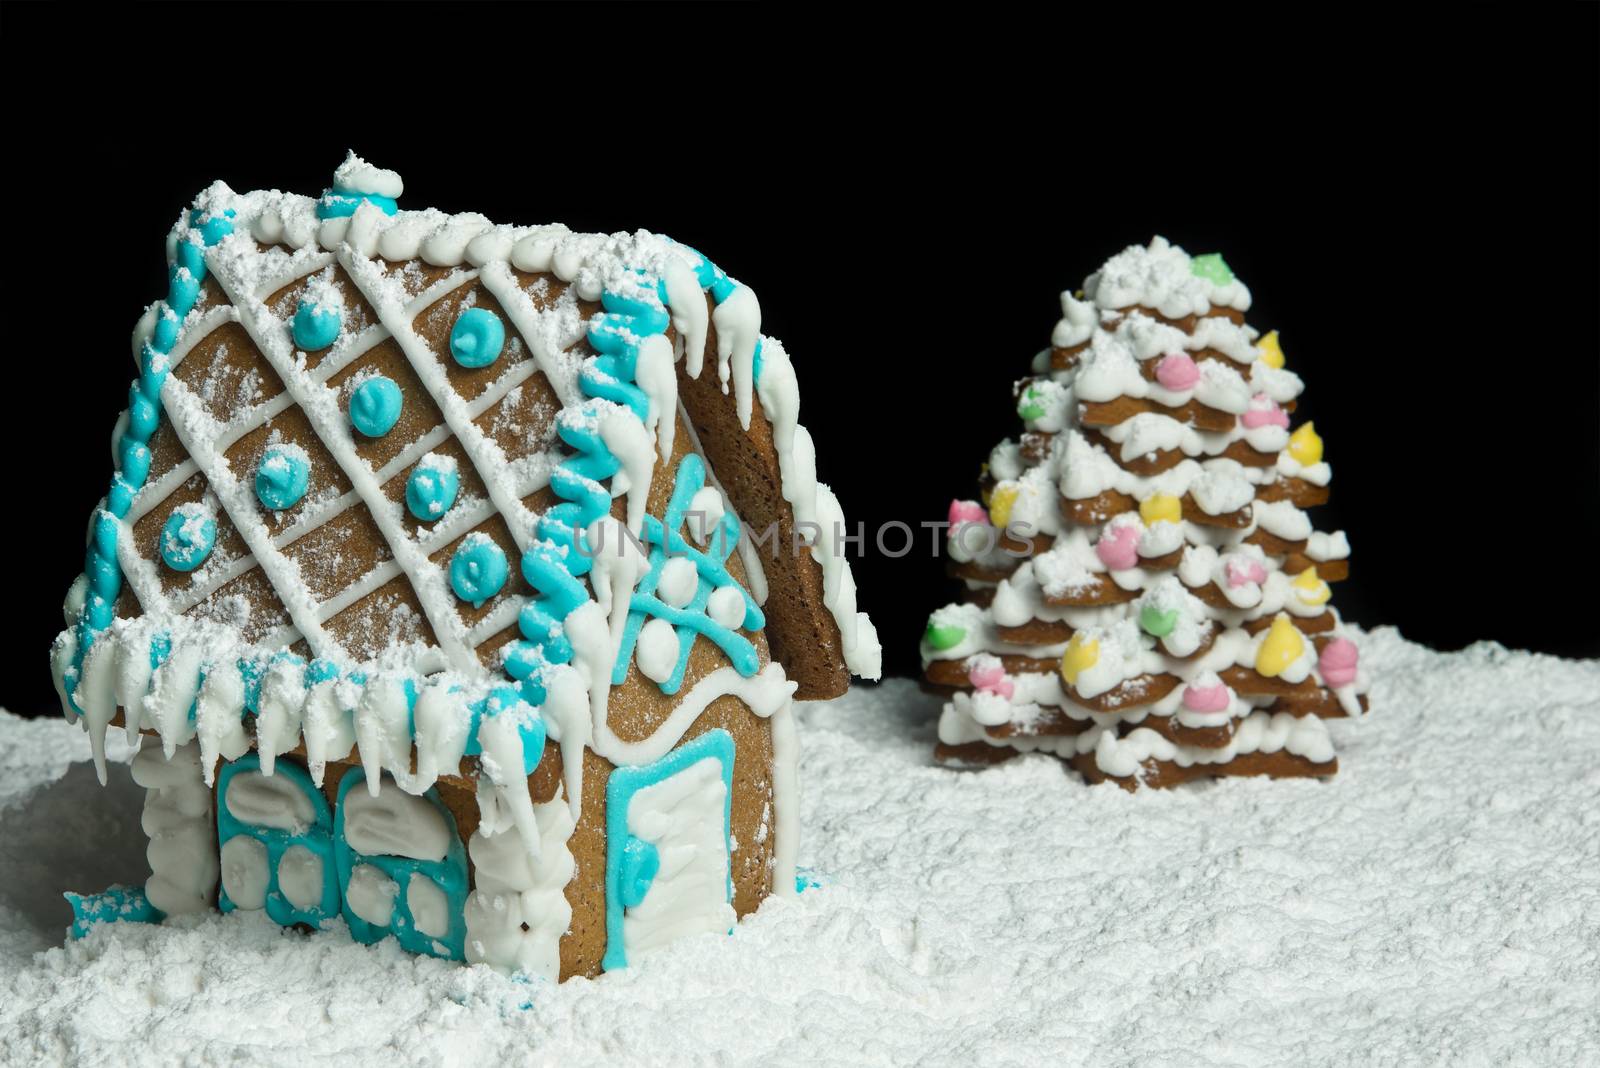 Gingerbread house and christmas tree over black background